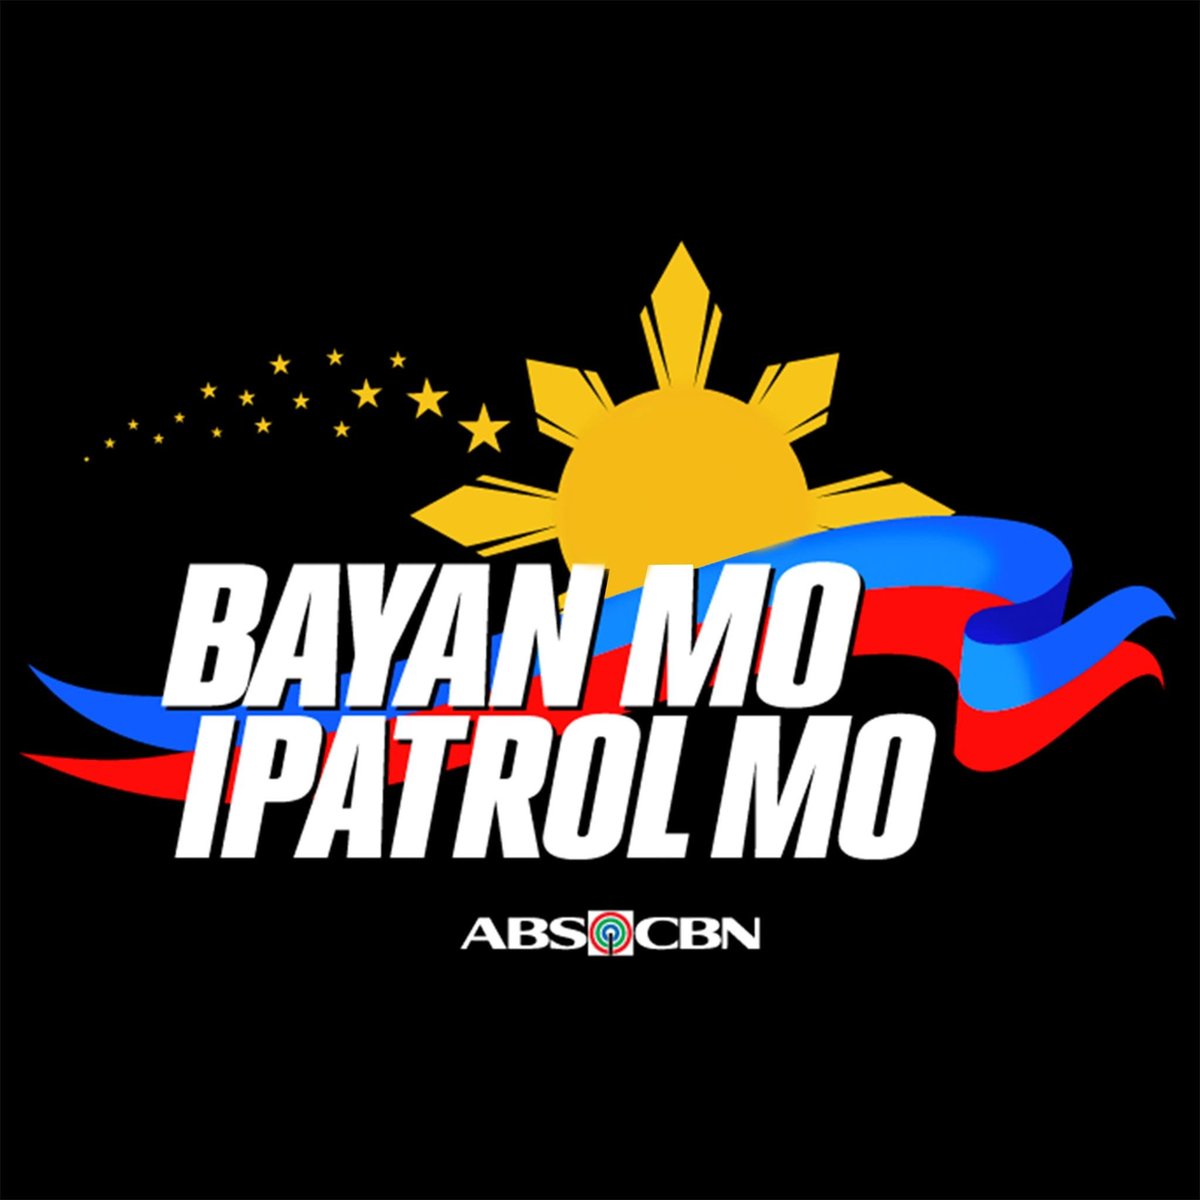 It was also when ABS-CBN News did not hesitate to broadcast the tragedy in Ted Failon's family.

The year 2009 was also when ABS launched its coverage of the 2010 presidential elections - BMPM: Ako Ang Simula.